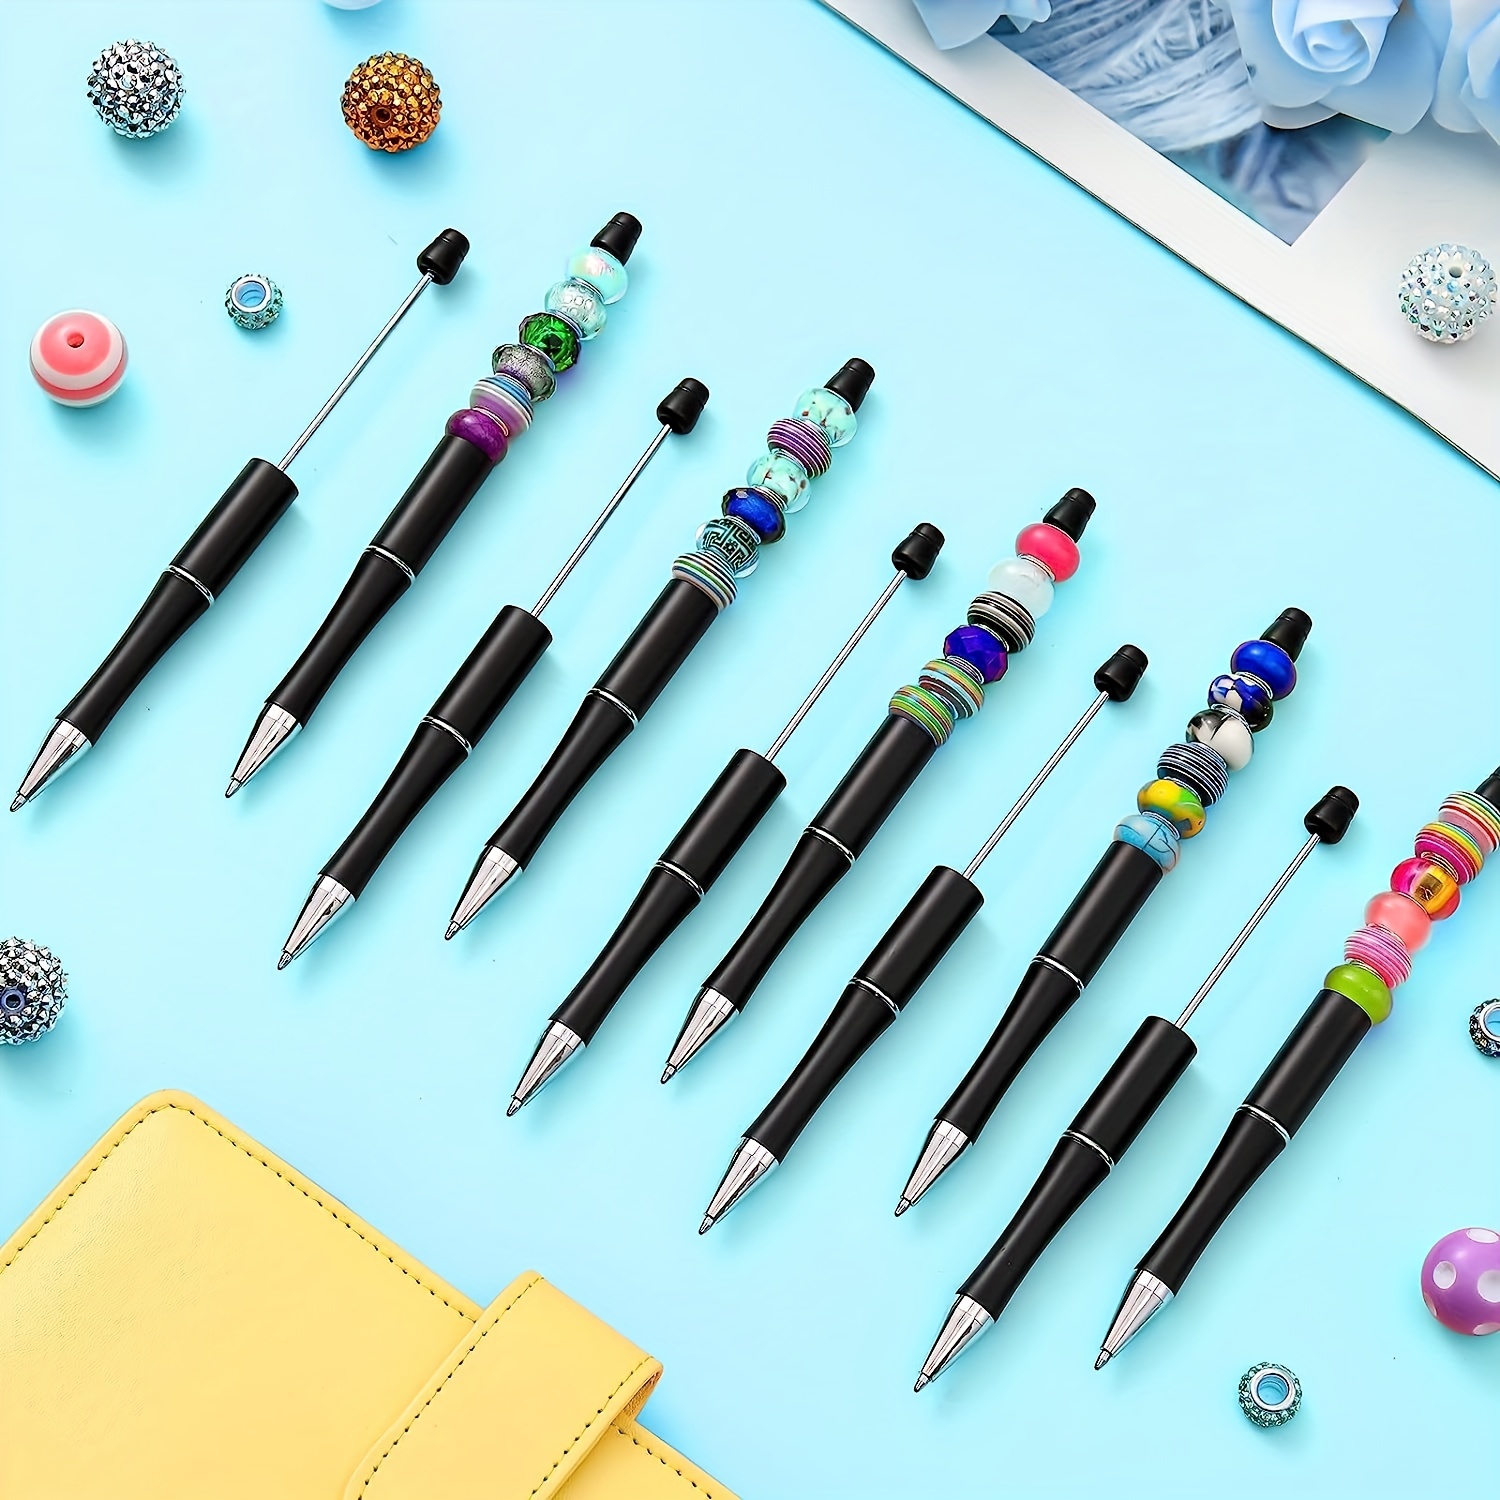 Dropship 5pcs Electroplated Bead Pen Plastic Beadable Pen Bead Ballpoint Pen  Assorted Bead Pen Shaft Black Ink Rollerball Pen For Kids Students Office  School Supplies to Sell Online at a Lower Price